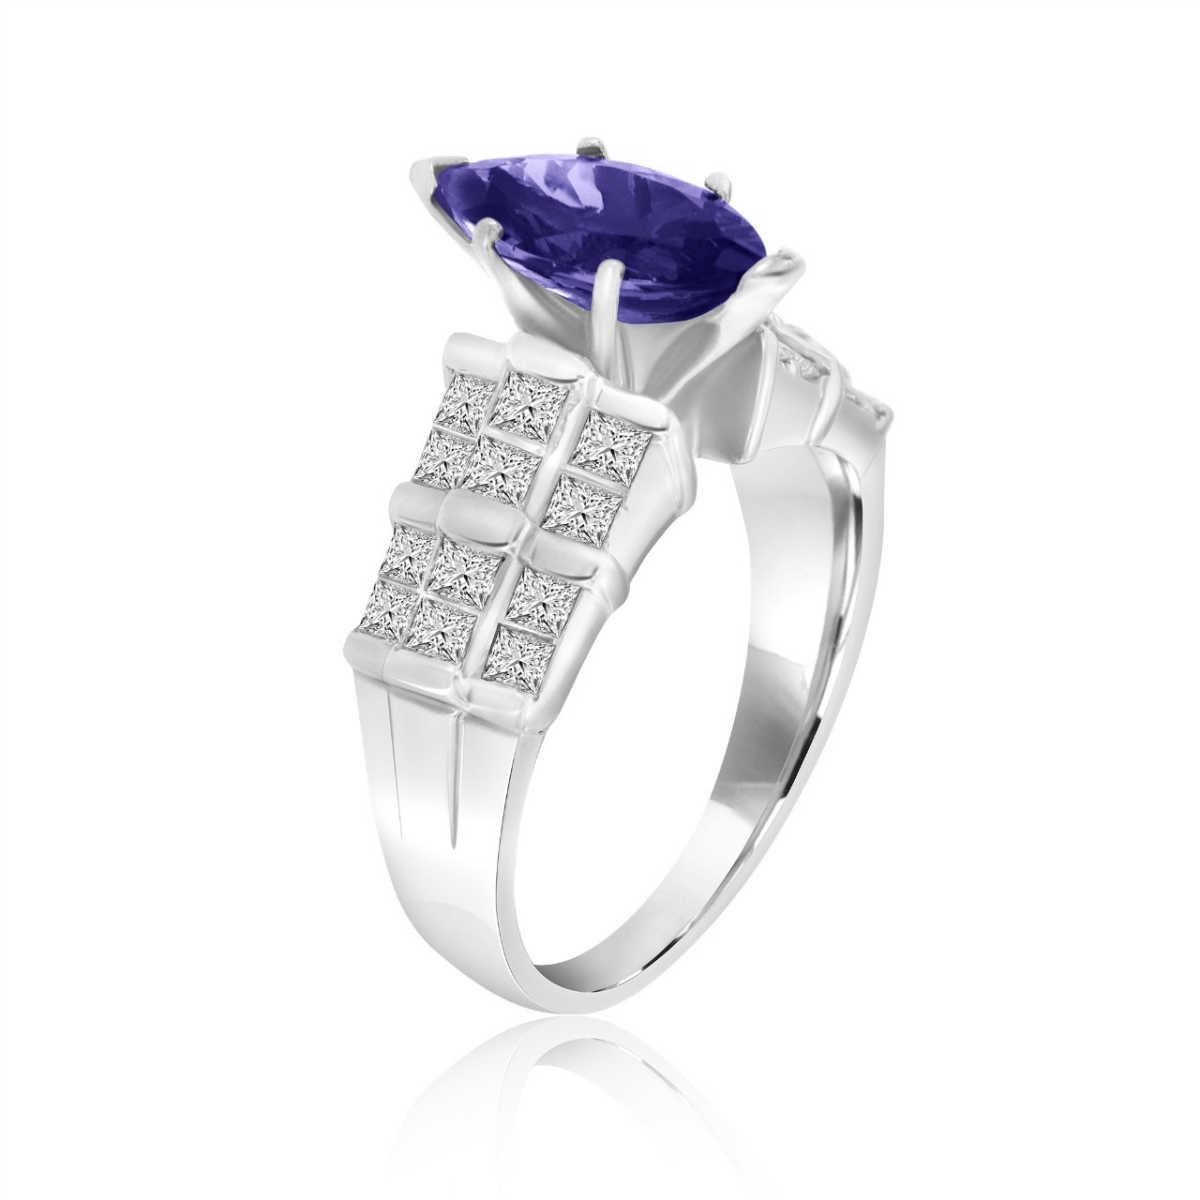 This Pre- Owned Platinum ring features a 1.99- carat marquise-shaped AAA Tanzanite set in six prongs. Three rows of twenty-four princess cut-shaped diamonds in an approximate weight of 2.00 Carat invisible set add to its glamorous look! The ring is